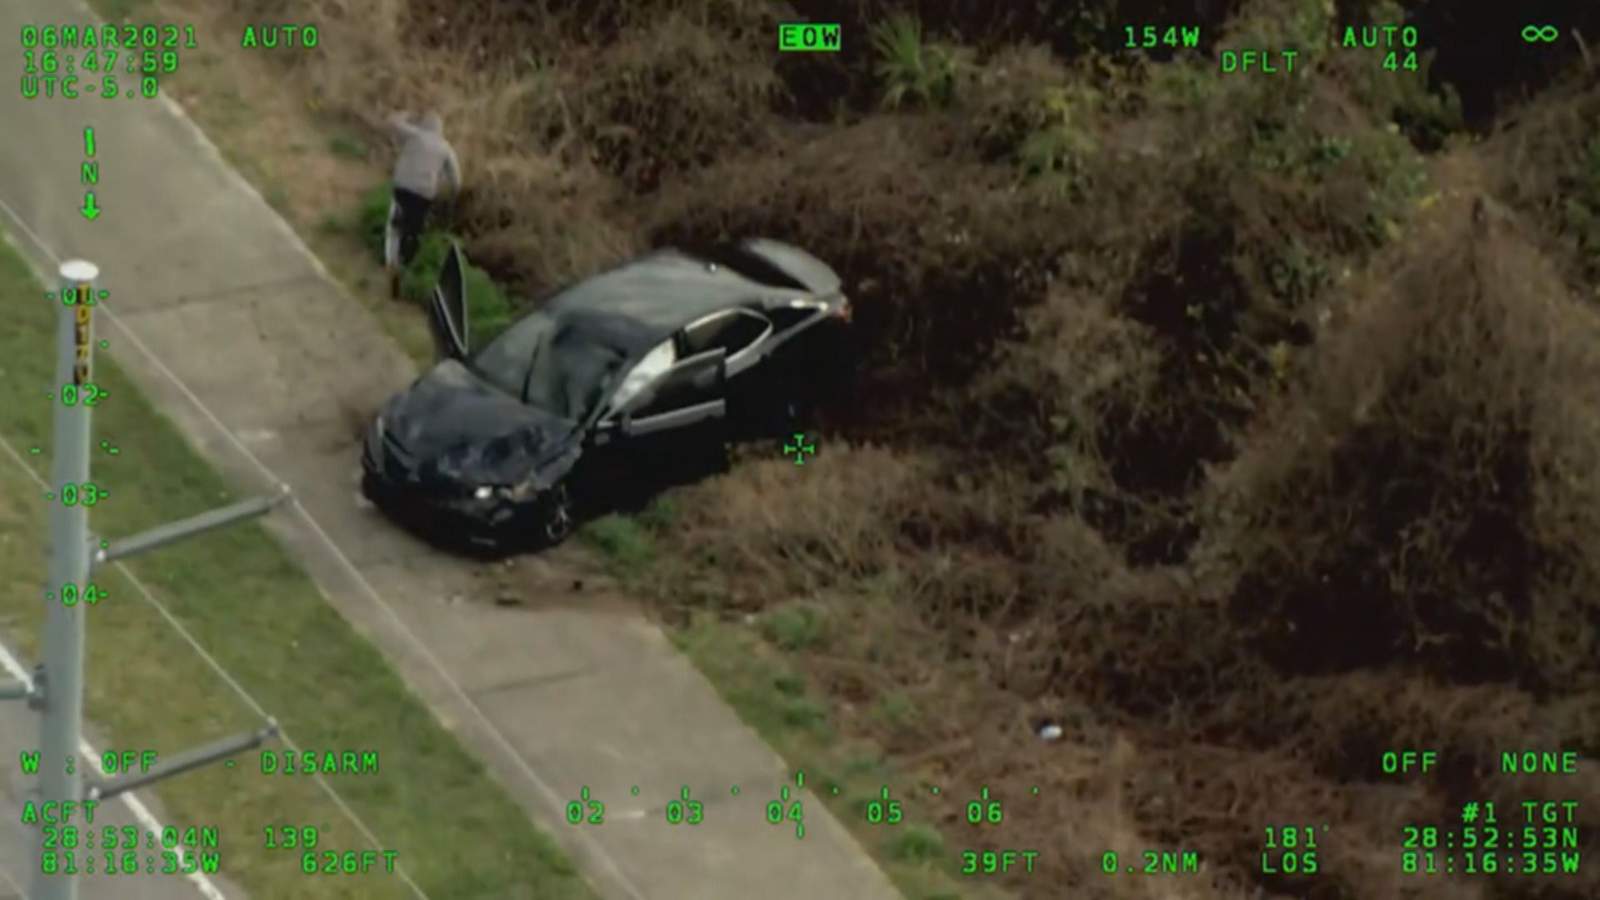 Suspects open fire on deputies before car rolls over during Central Florida police chase